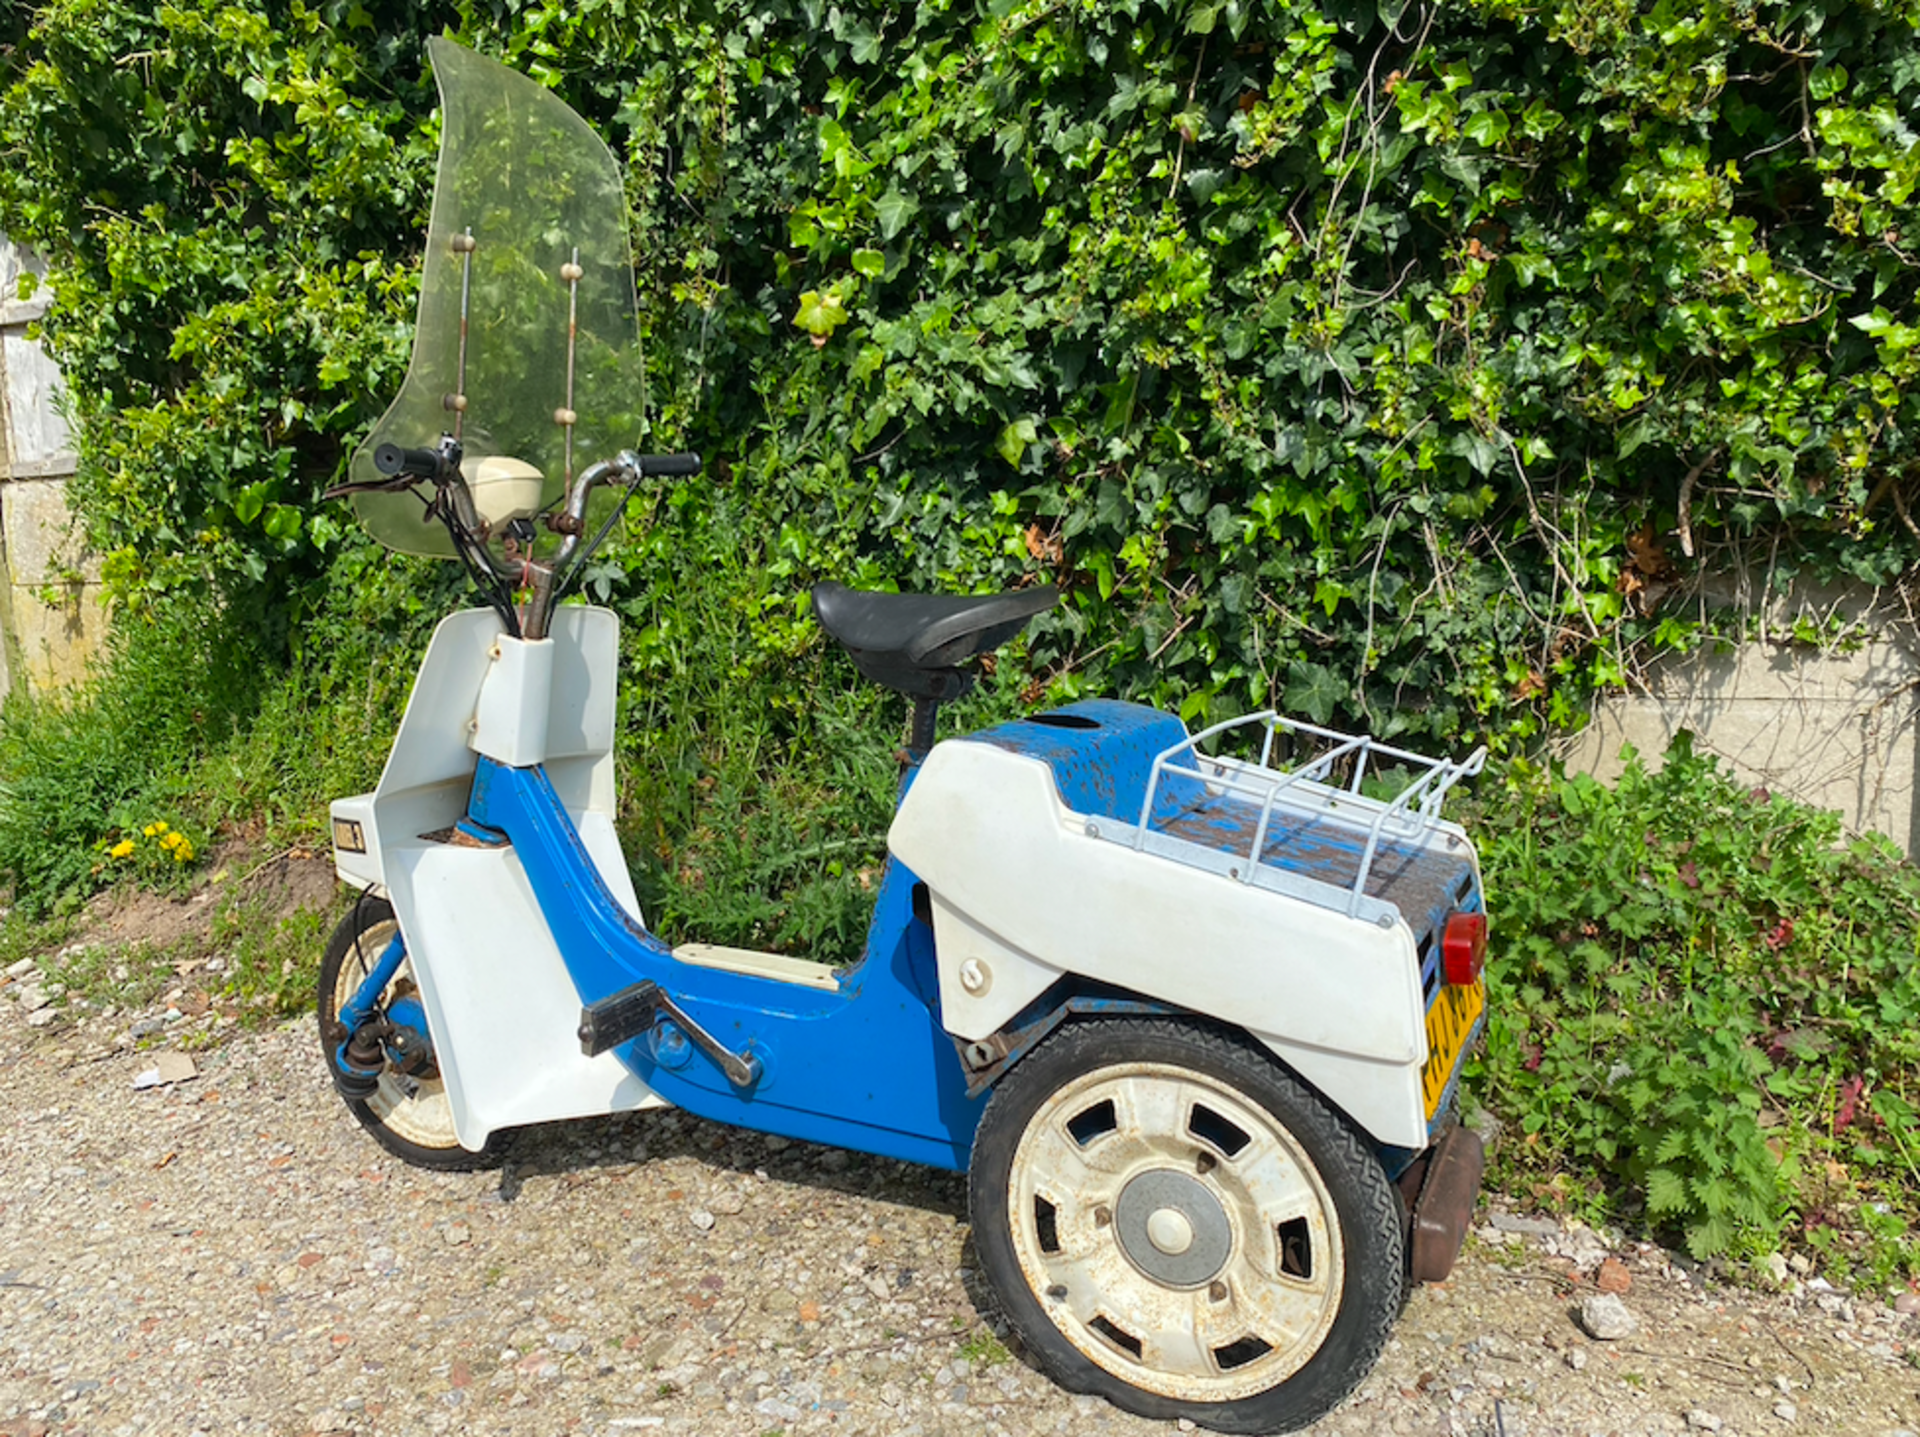 1972 BSA ARIEL 3 TRICYCLE - Image 5 of 6